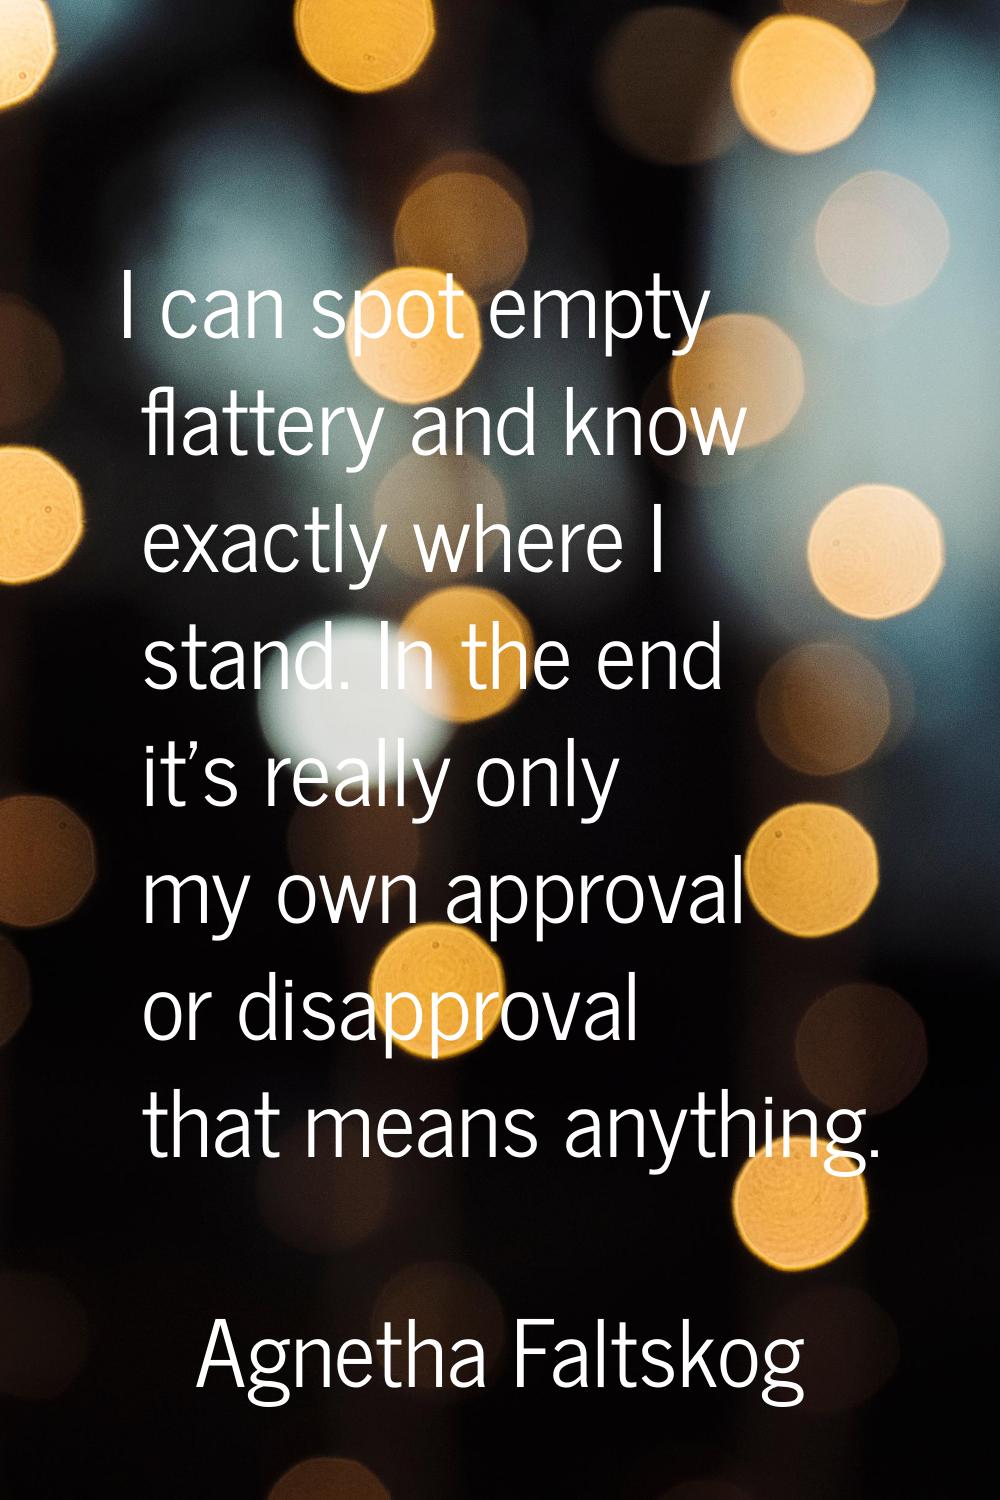 I can spot empty flattery and know exactly where I stand. In the end it's really only my own approv